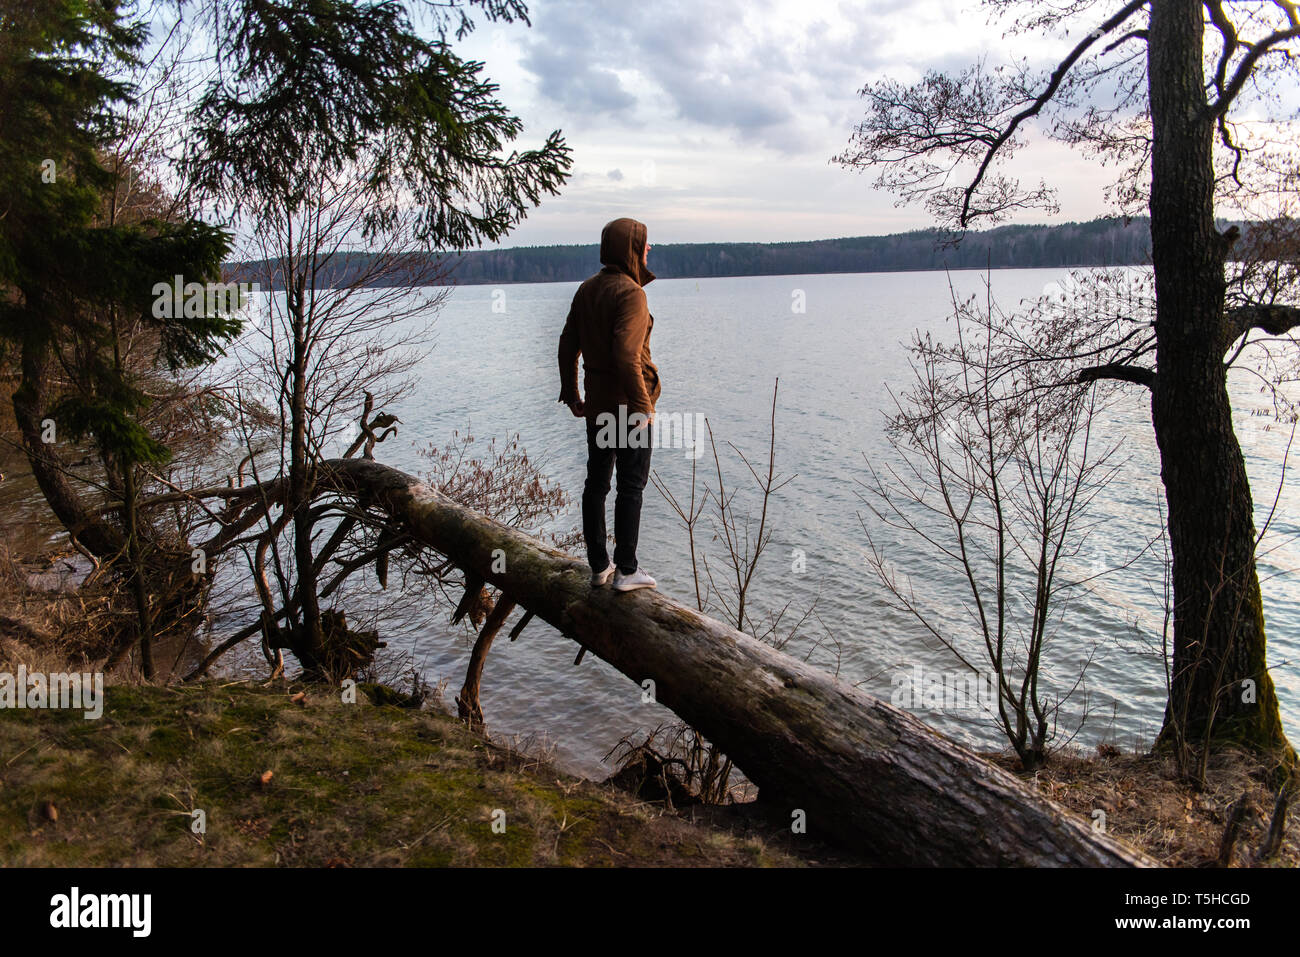 Man standing on an overturned tree, looking at the lake Stock Photo